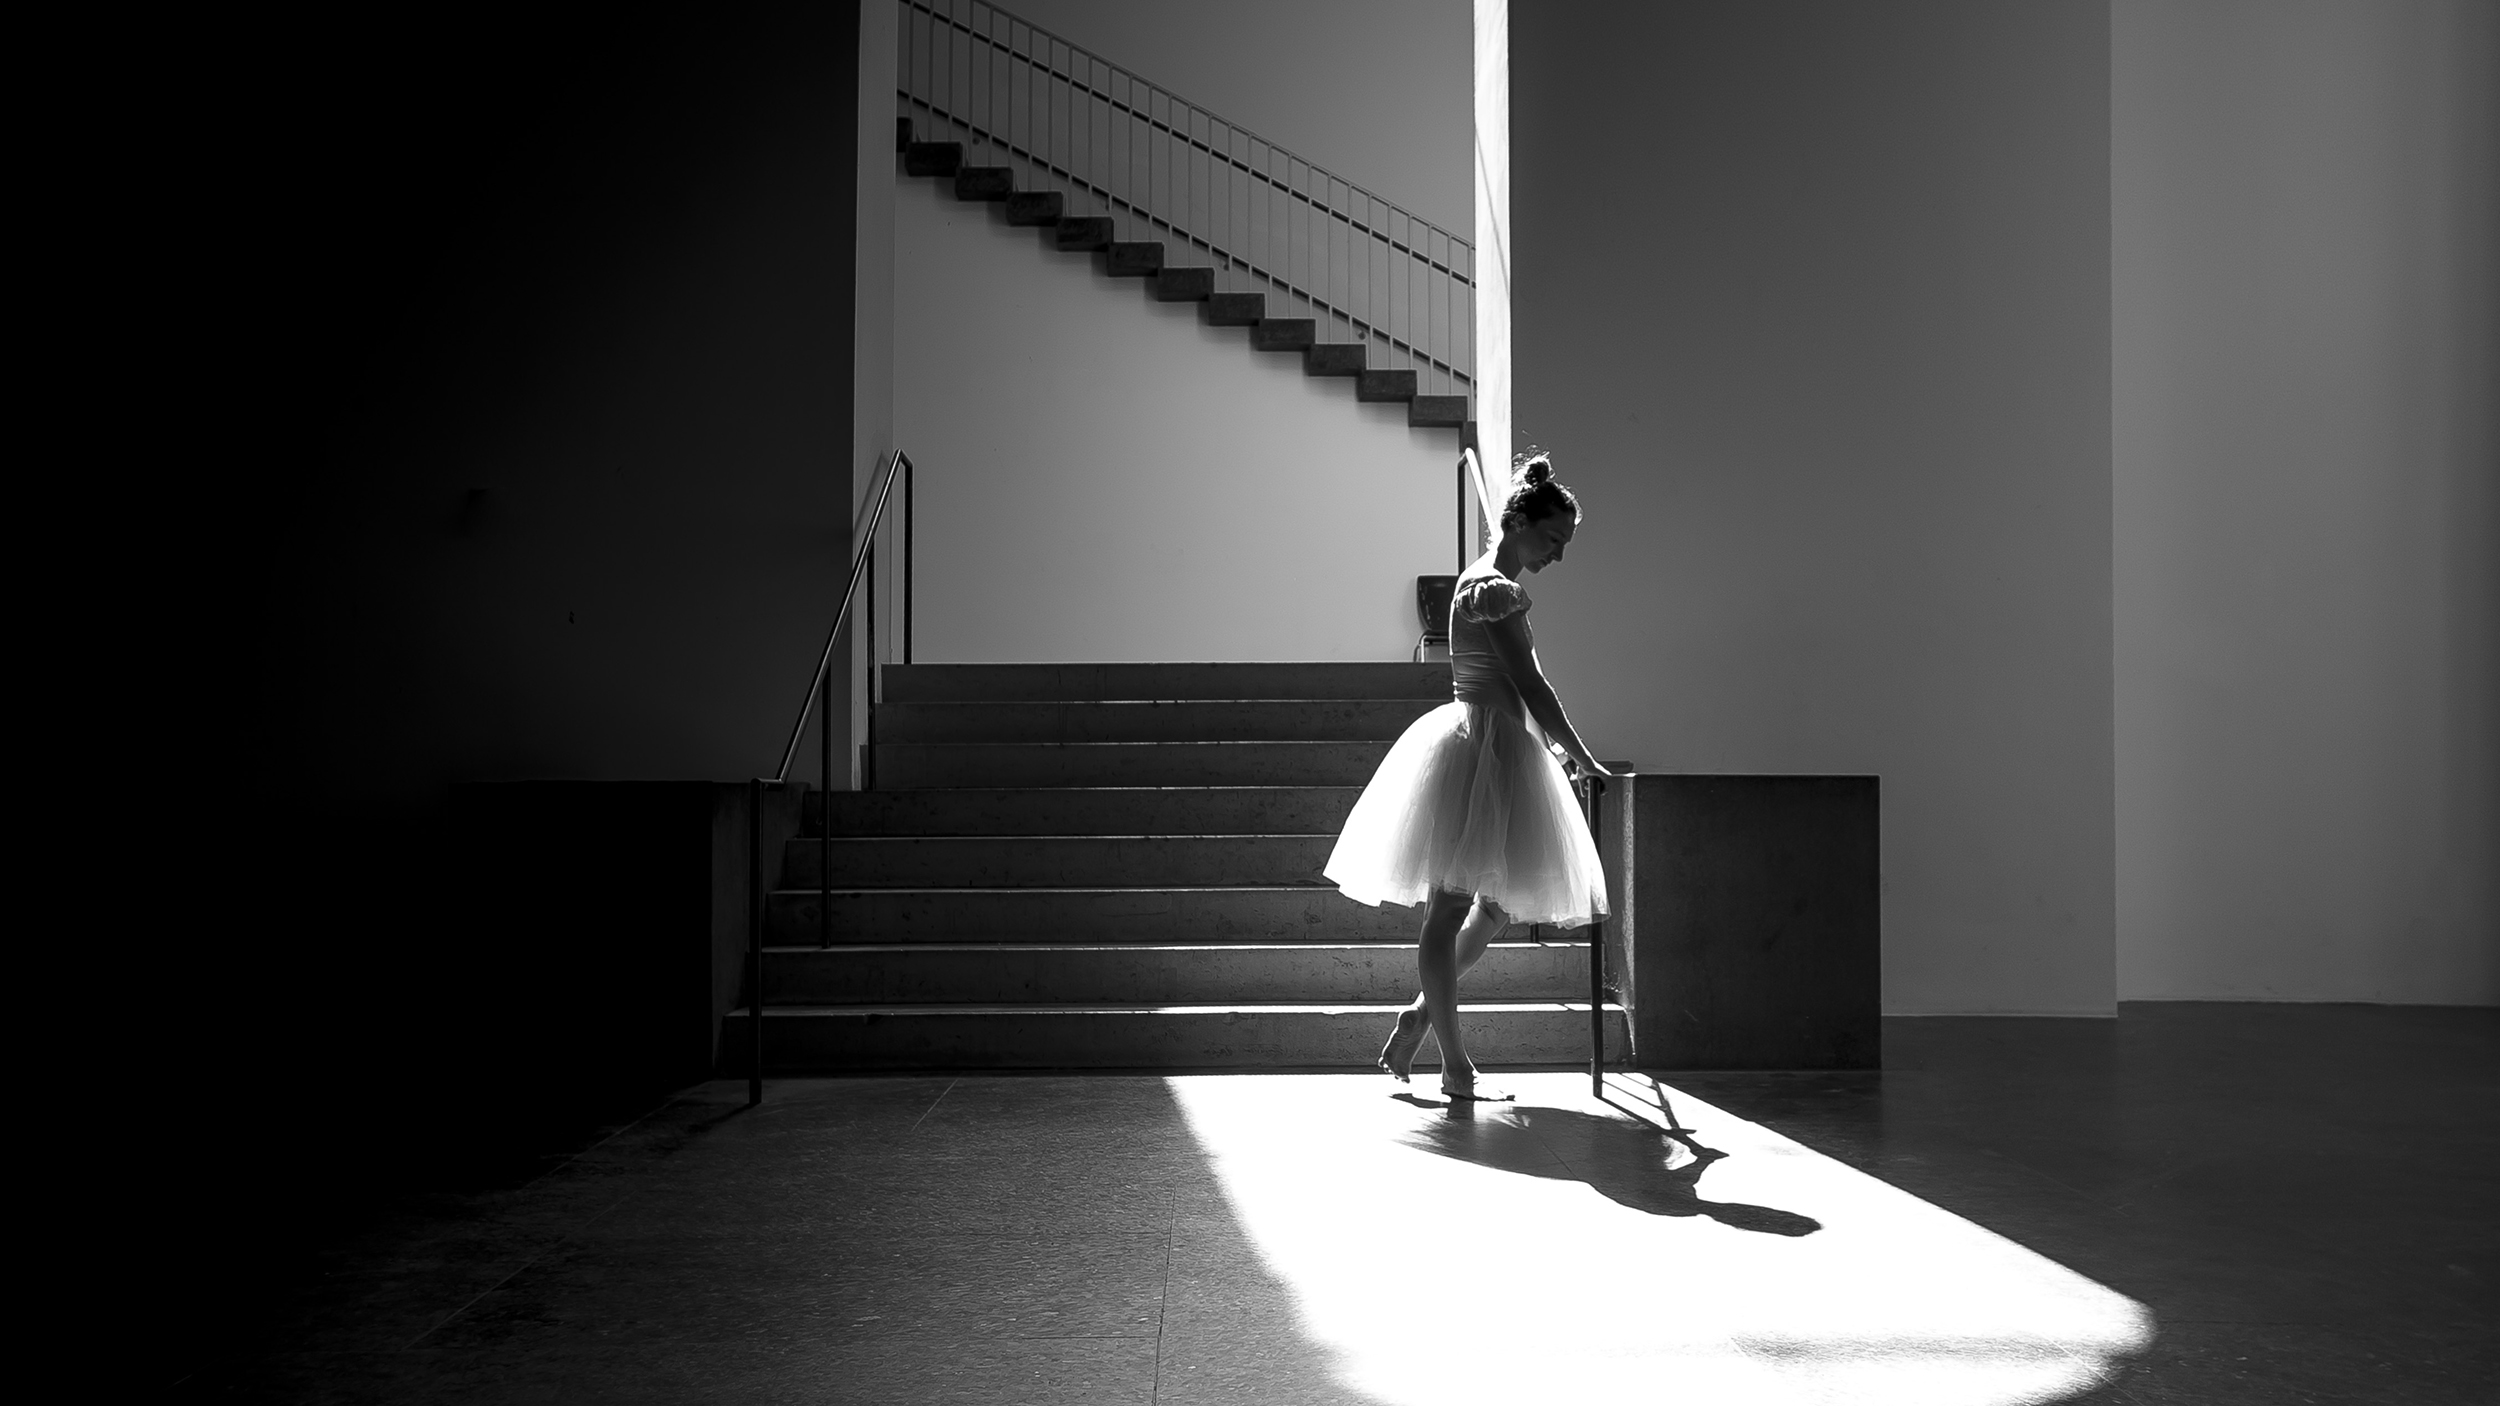 In this black and white photo, a balerina in a knee-length tutu stands at the bottom of a stairwell, holding onto the handrail and looking down at it. She stands in a pool of bright light under an archway, and in the background is another staircase perpendicular to the archway.